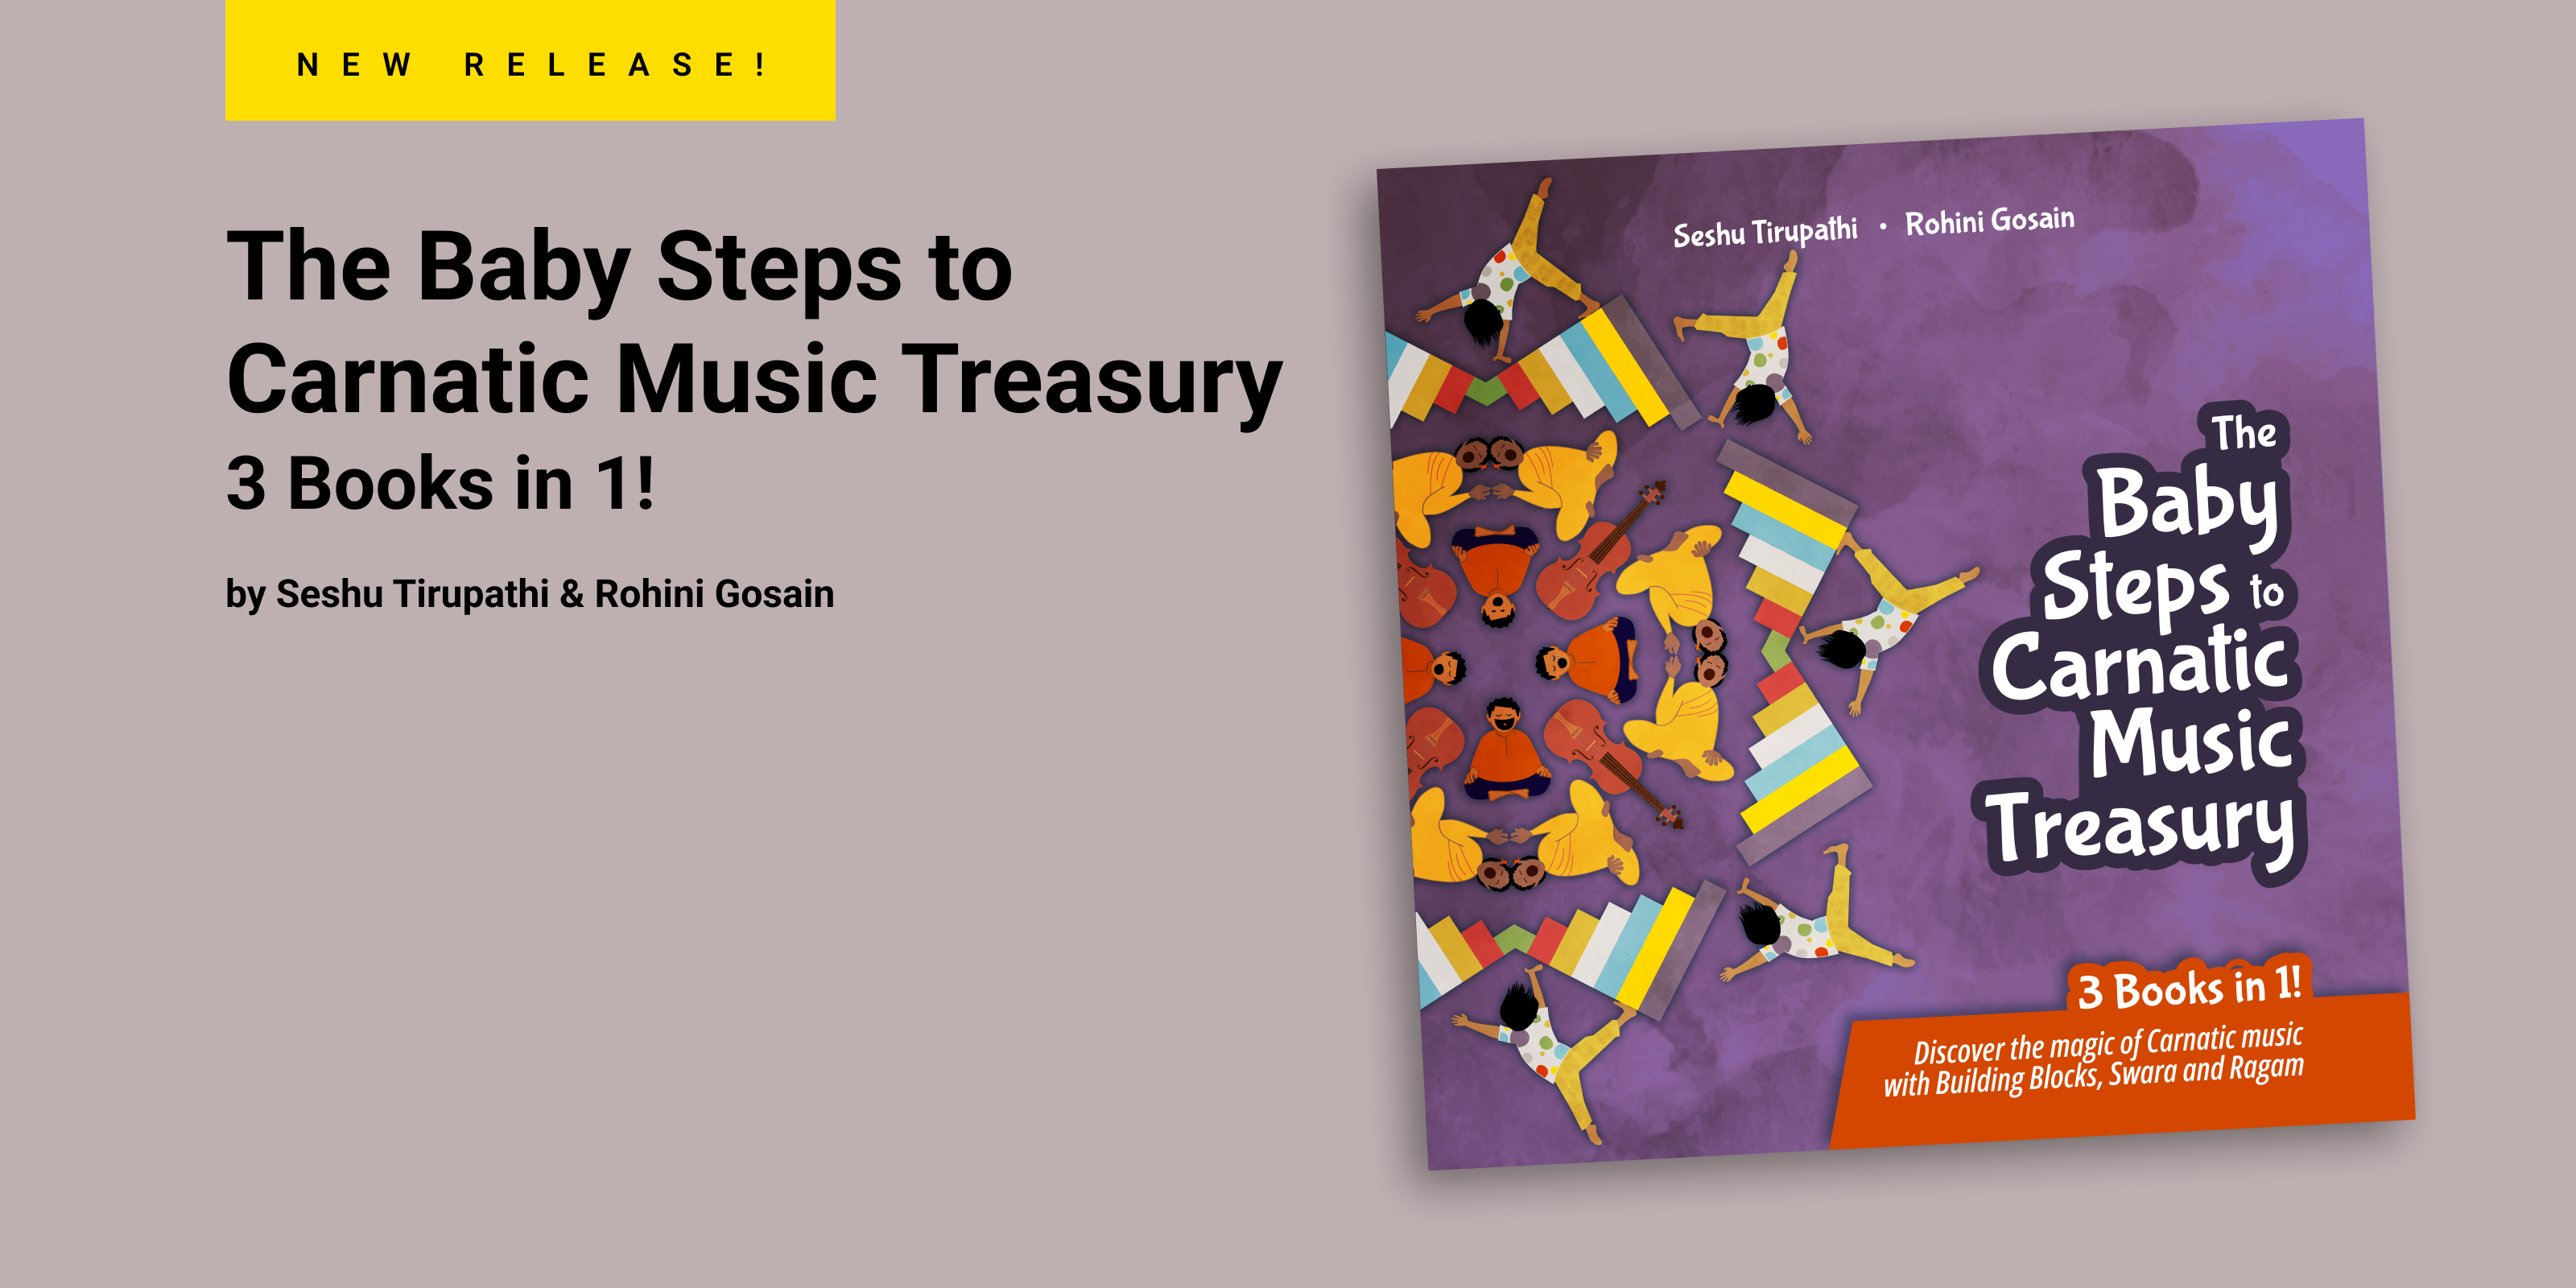 The Baby Steps to Carnatic Music Treasury book